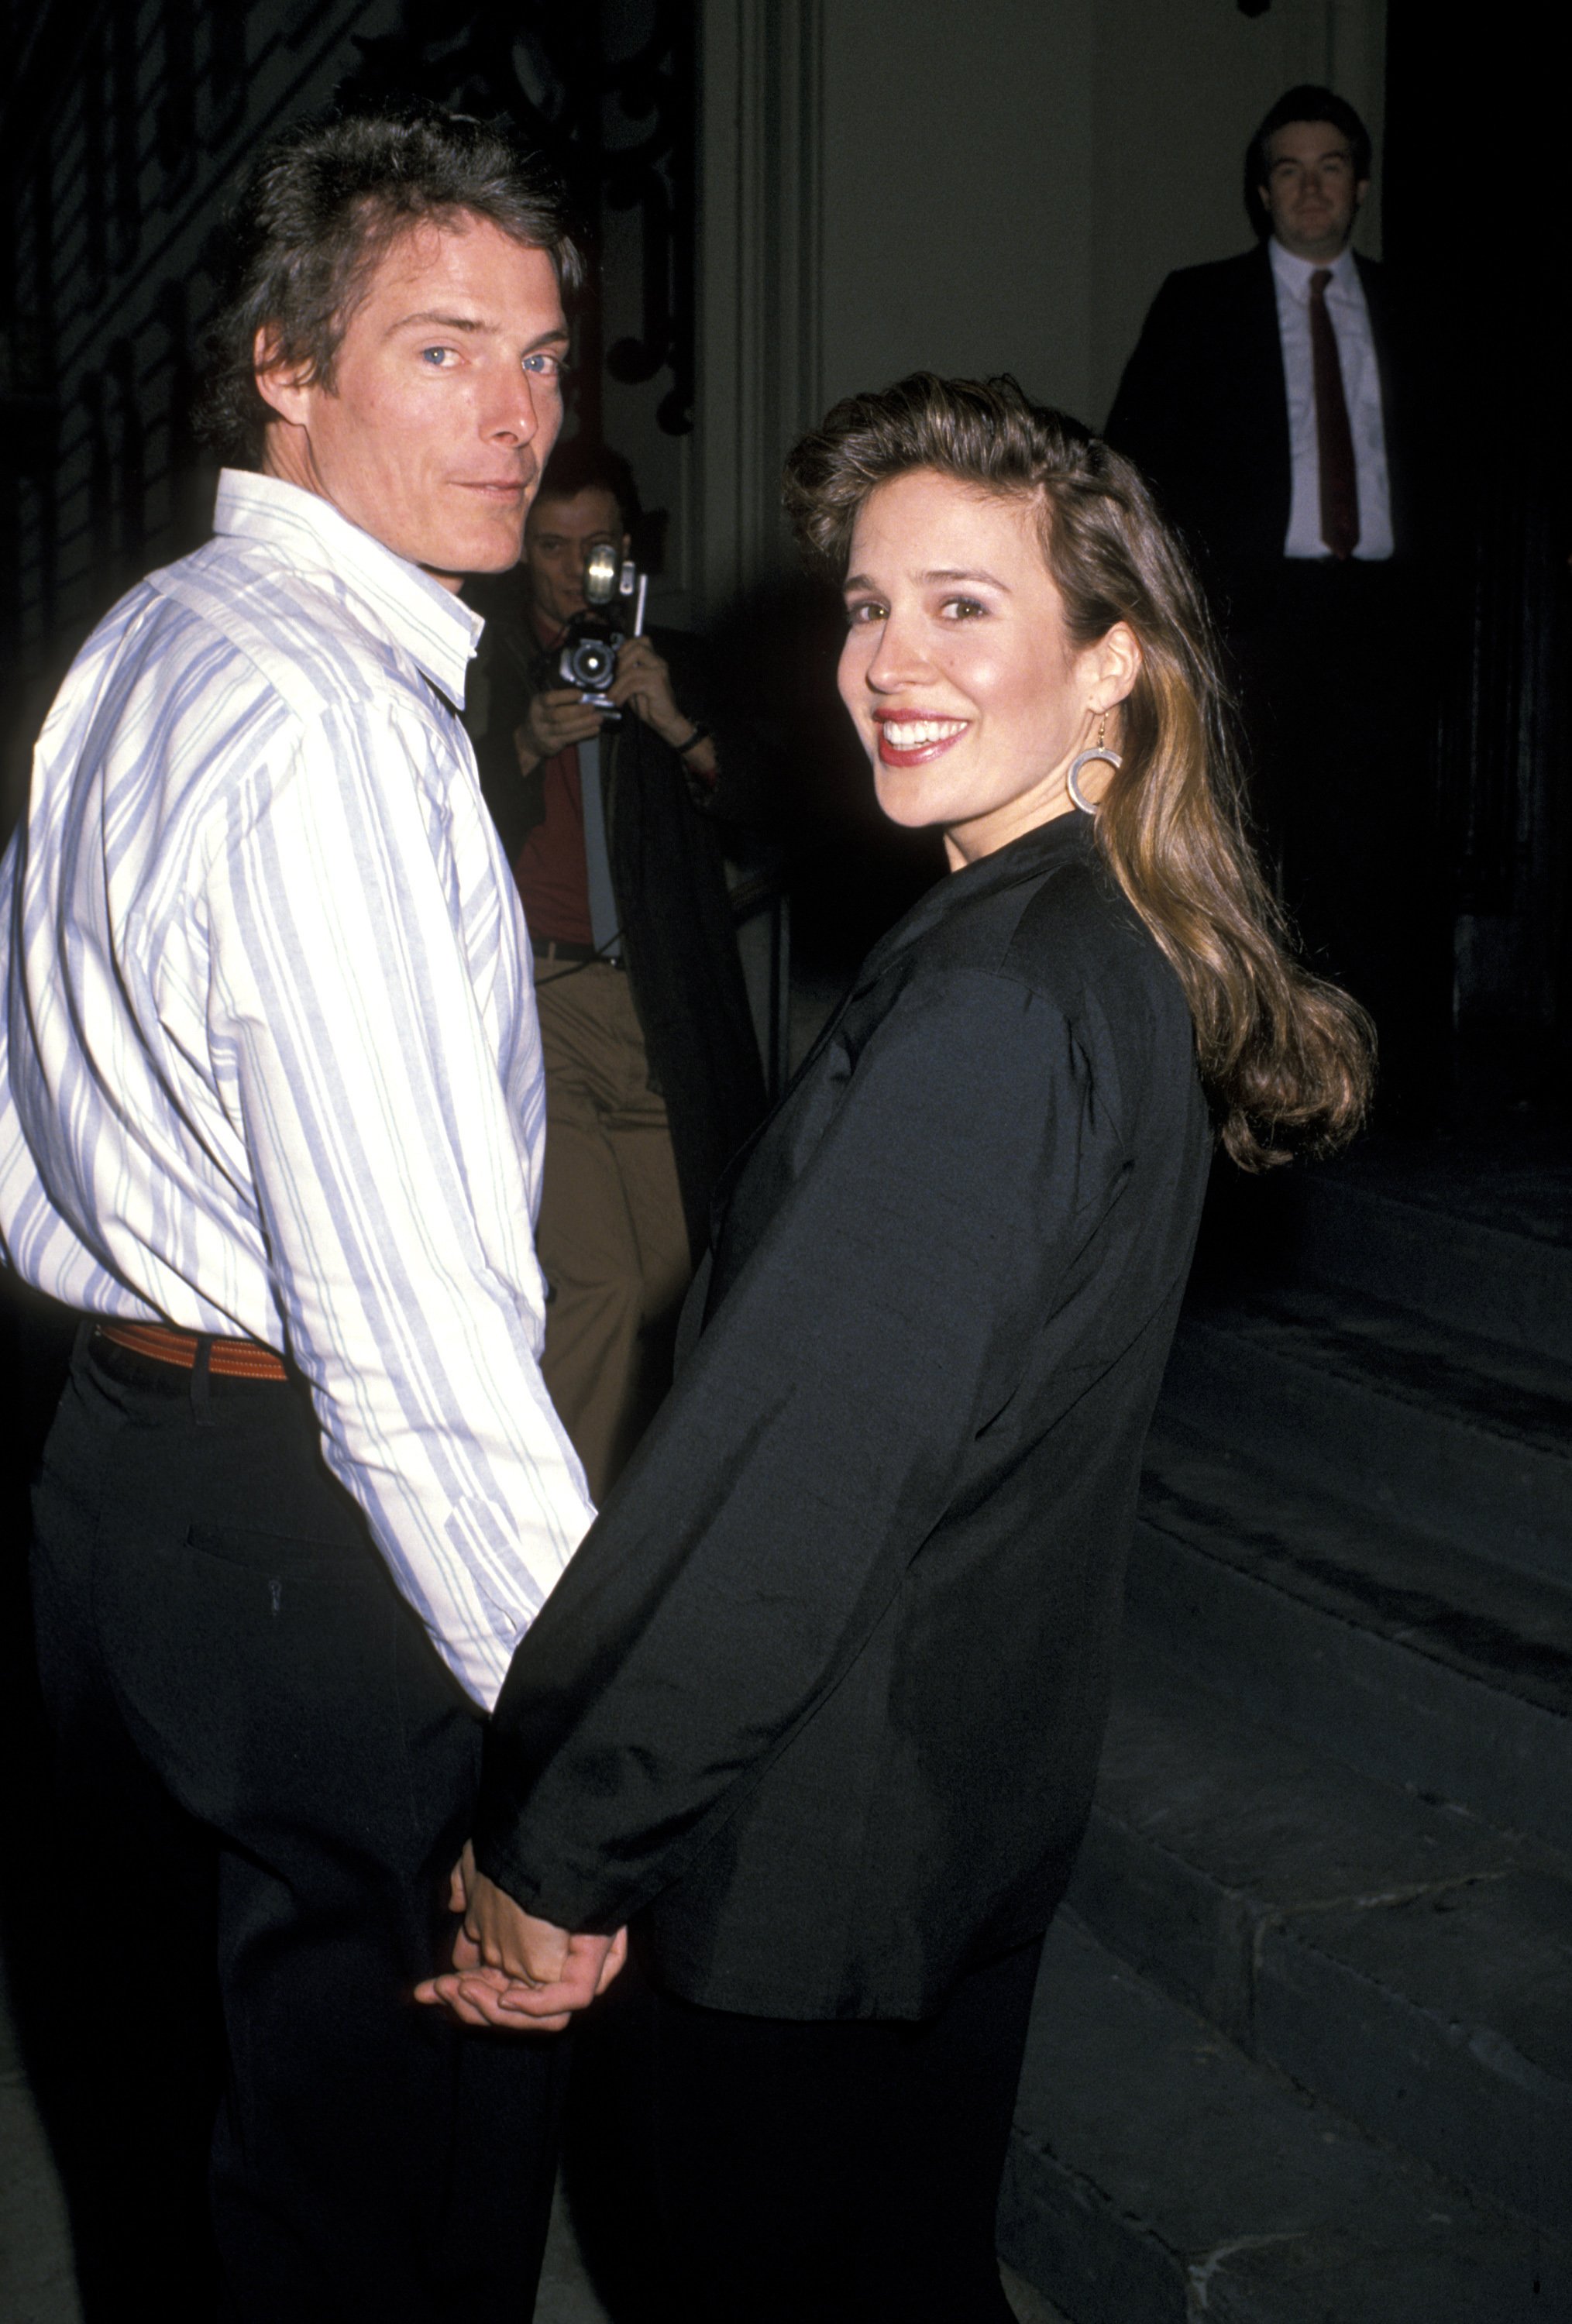 Christopher Reeve and Dana Reeve during Christopher Reeve and Dana Reeve at Central Park West - May 2, 1989 at Central Park West in New York City, New York, United States. | Source: Getty Images